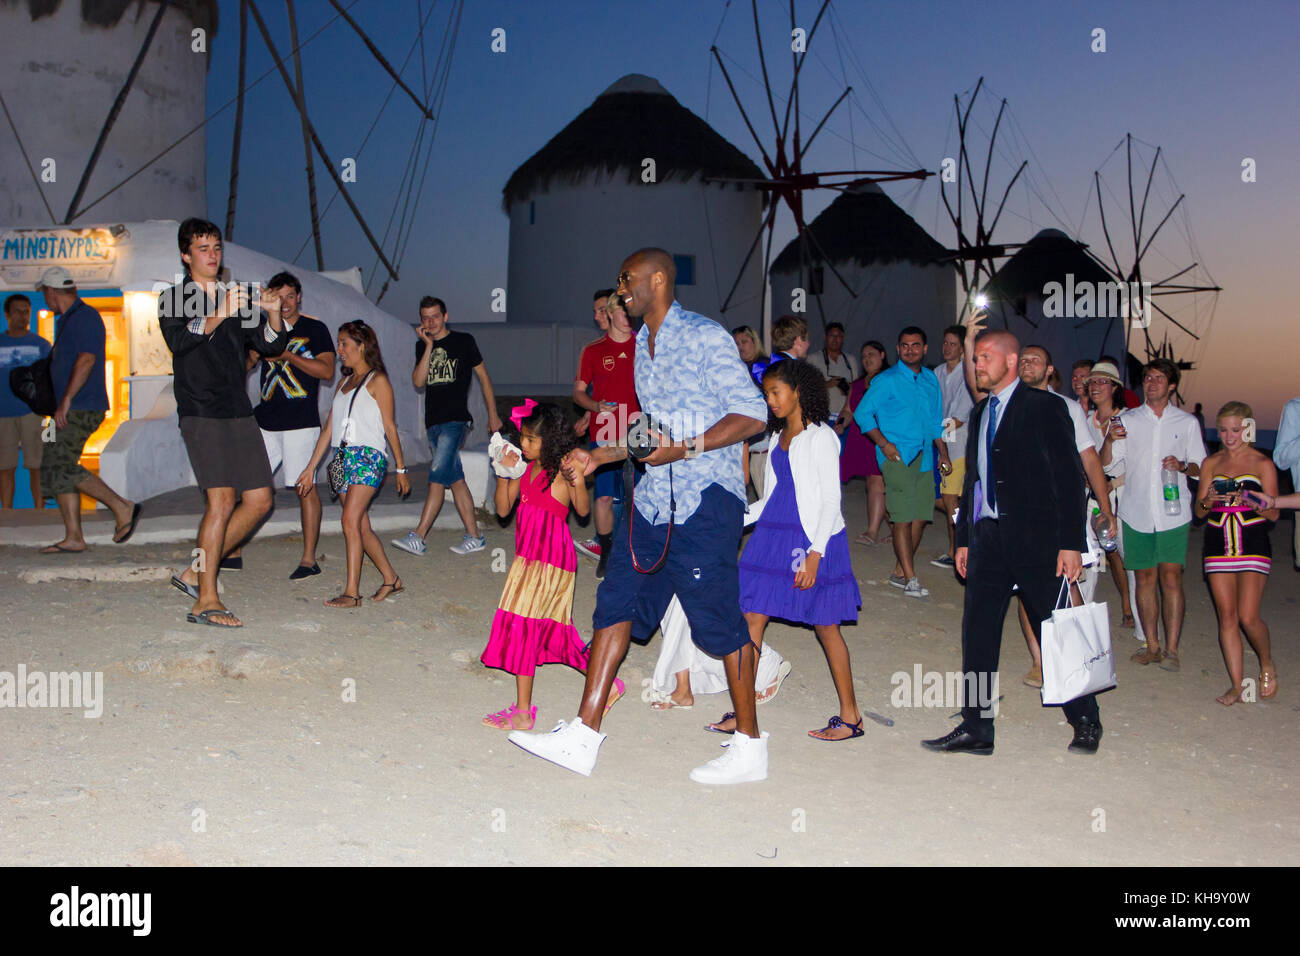 Basketball star Kobe Bryant with wife Vanessa and family on vacation in  Mykonos,Greece. June 23,2014 Stock Photo